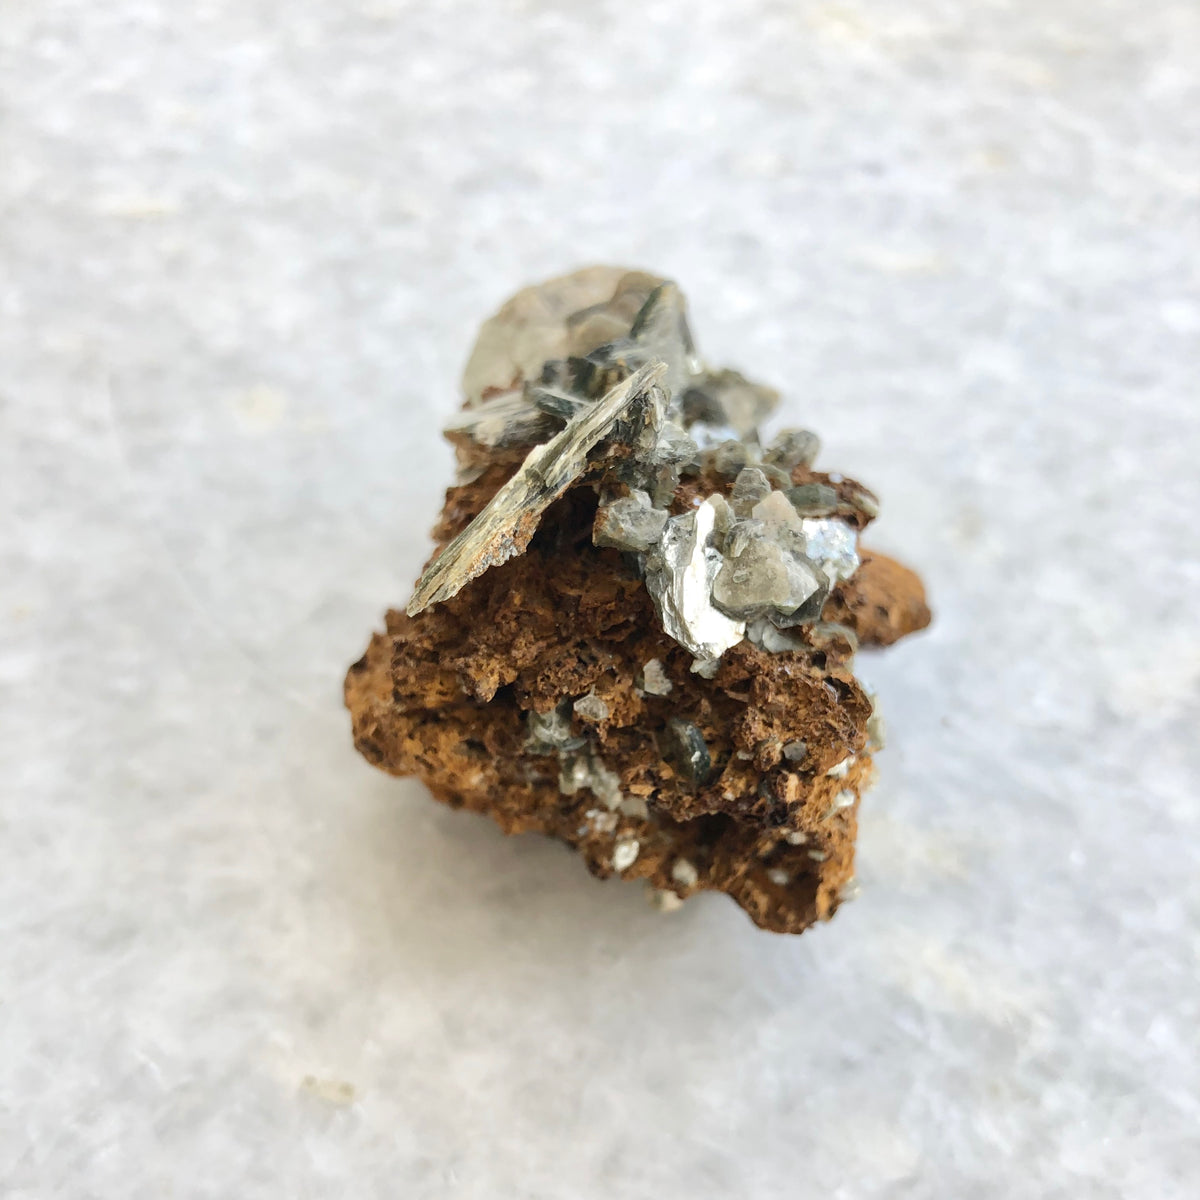 Rutile and Mica on Siderite